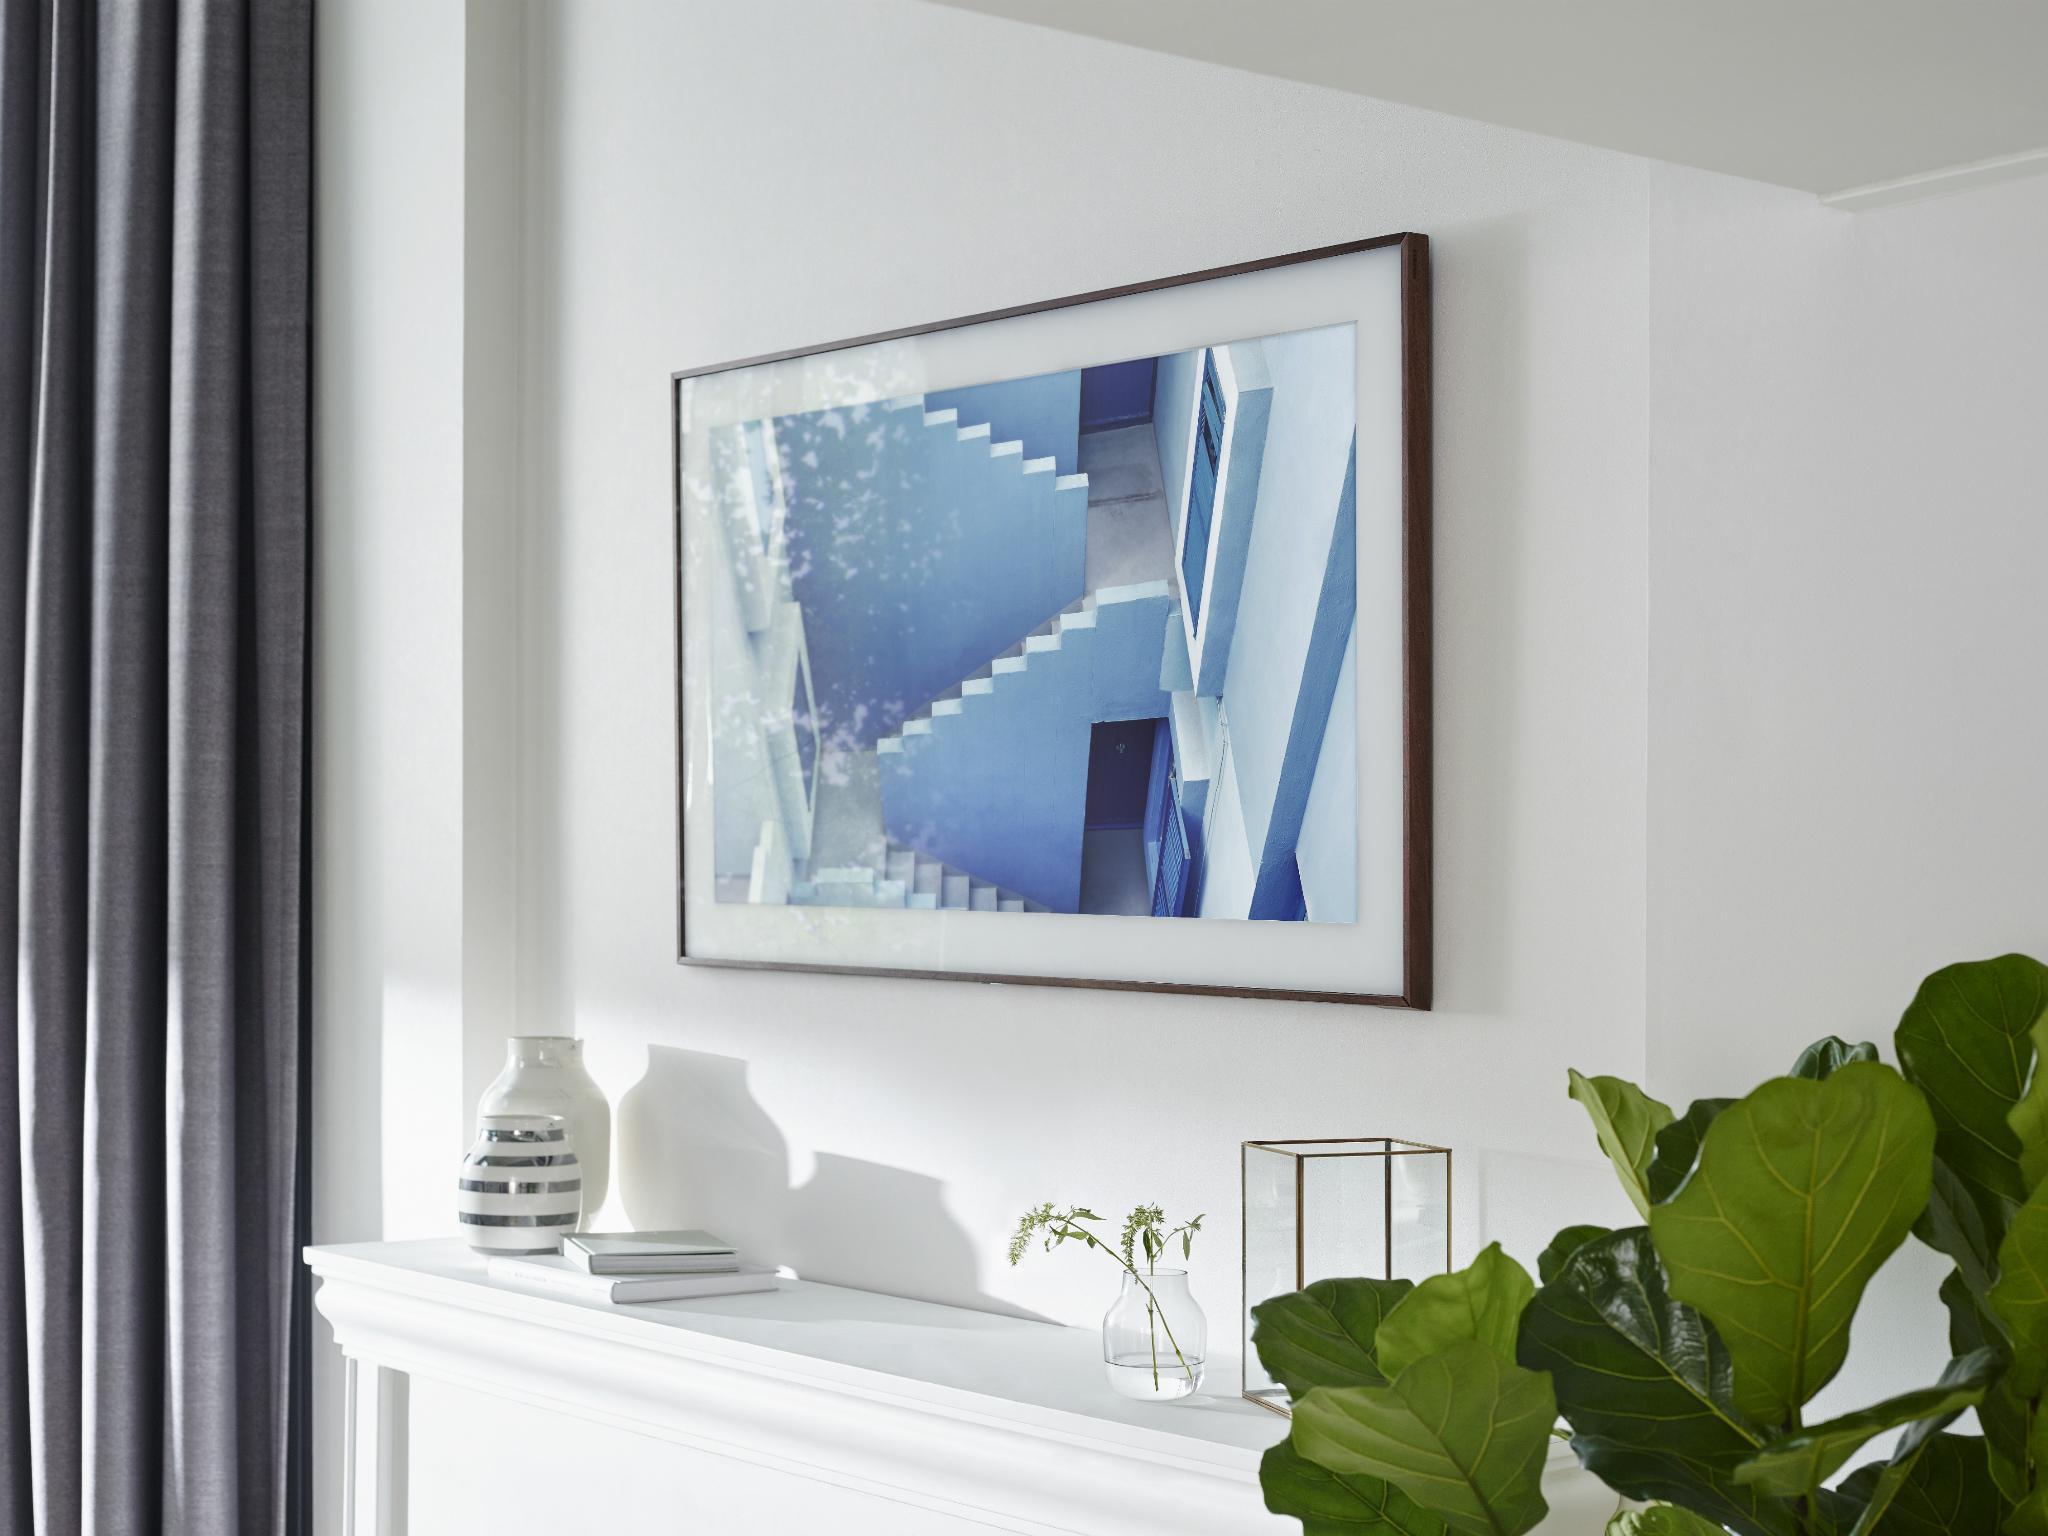 The Frame Samsung's new 4K TV transforms into wall art The Independent